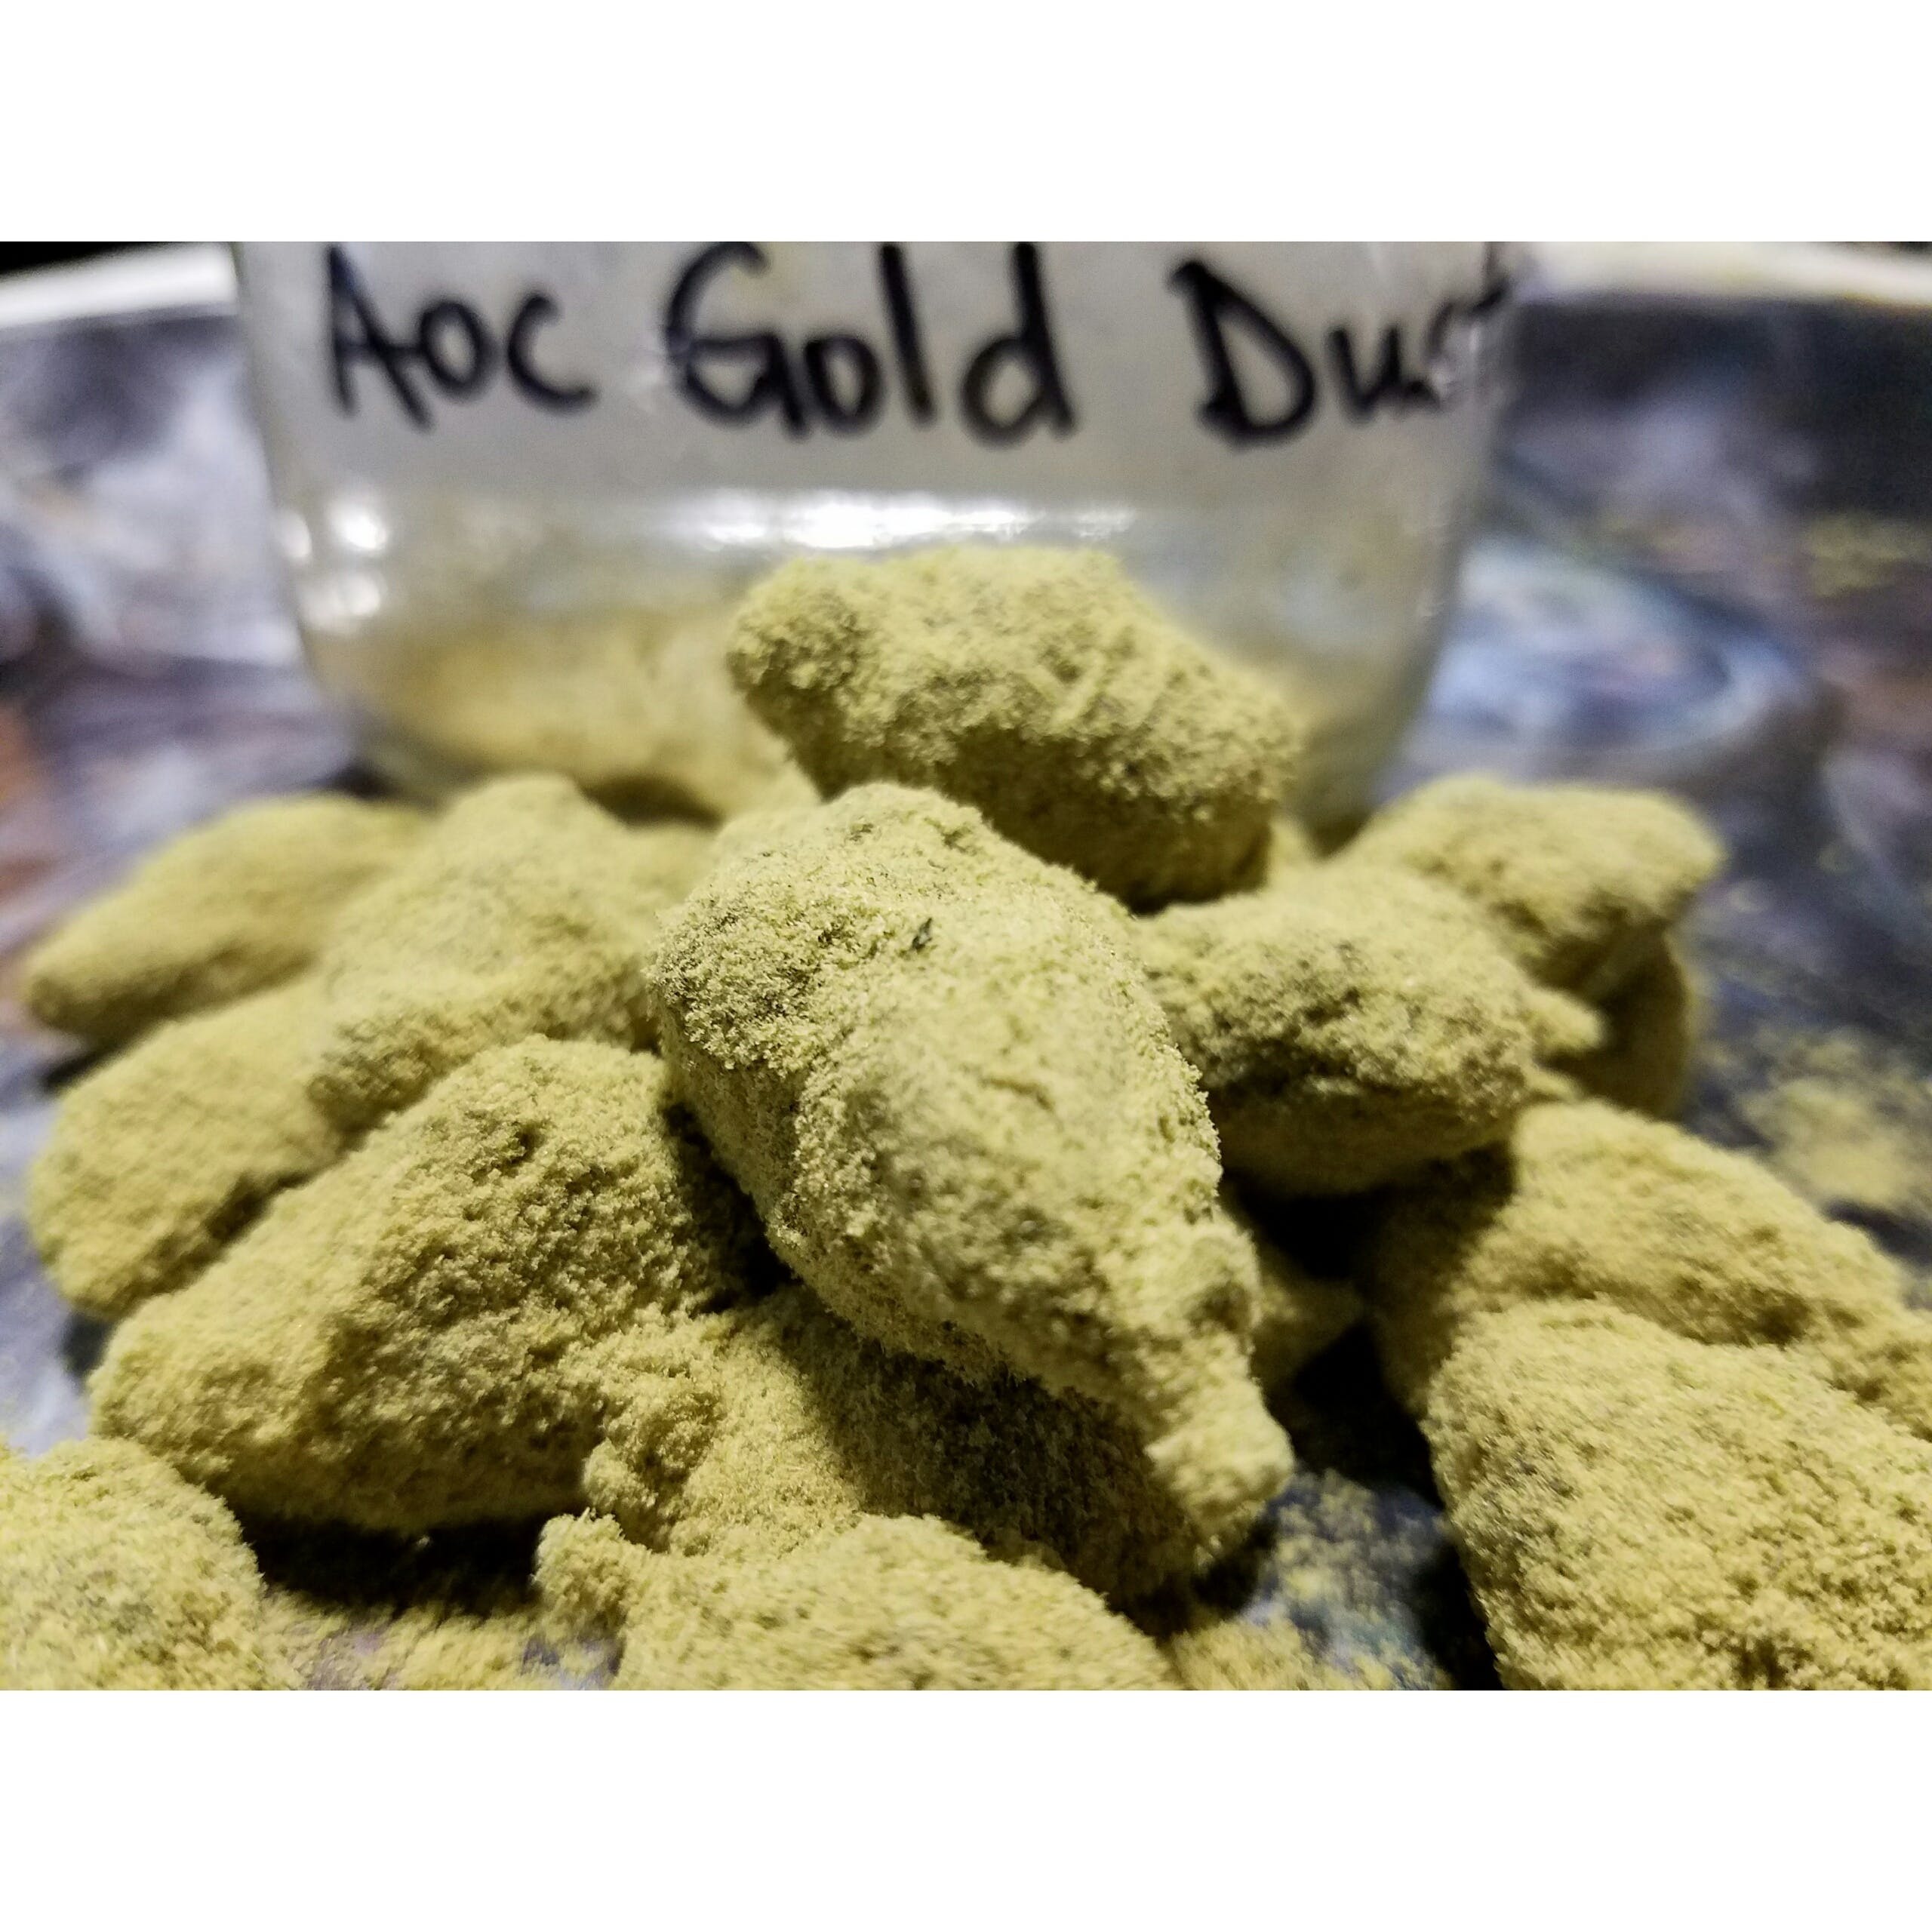 concentrate-a-o-c-gold-dust